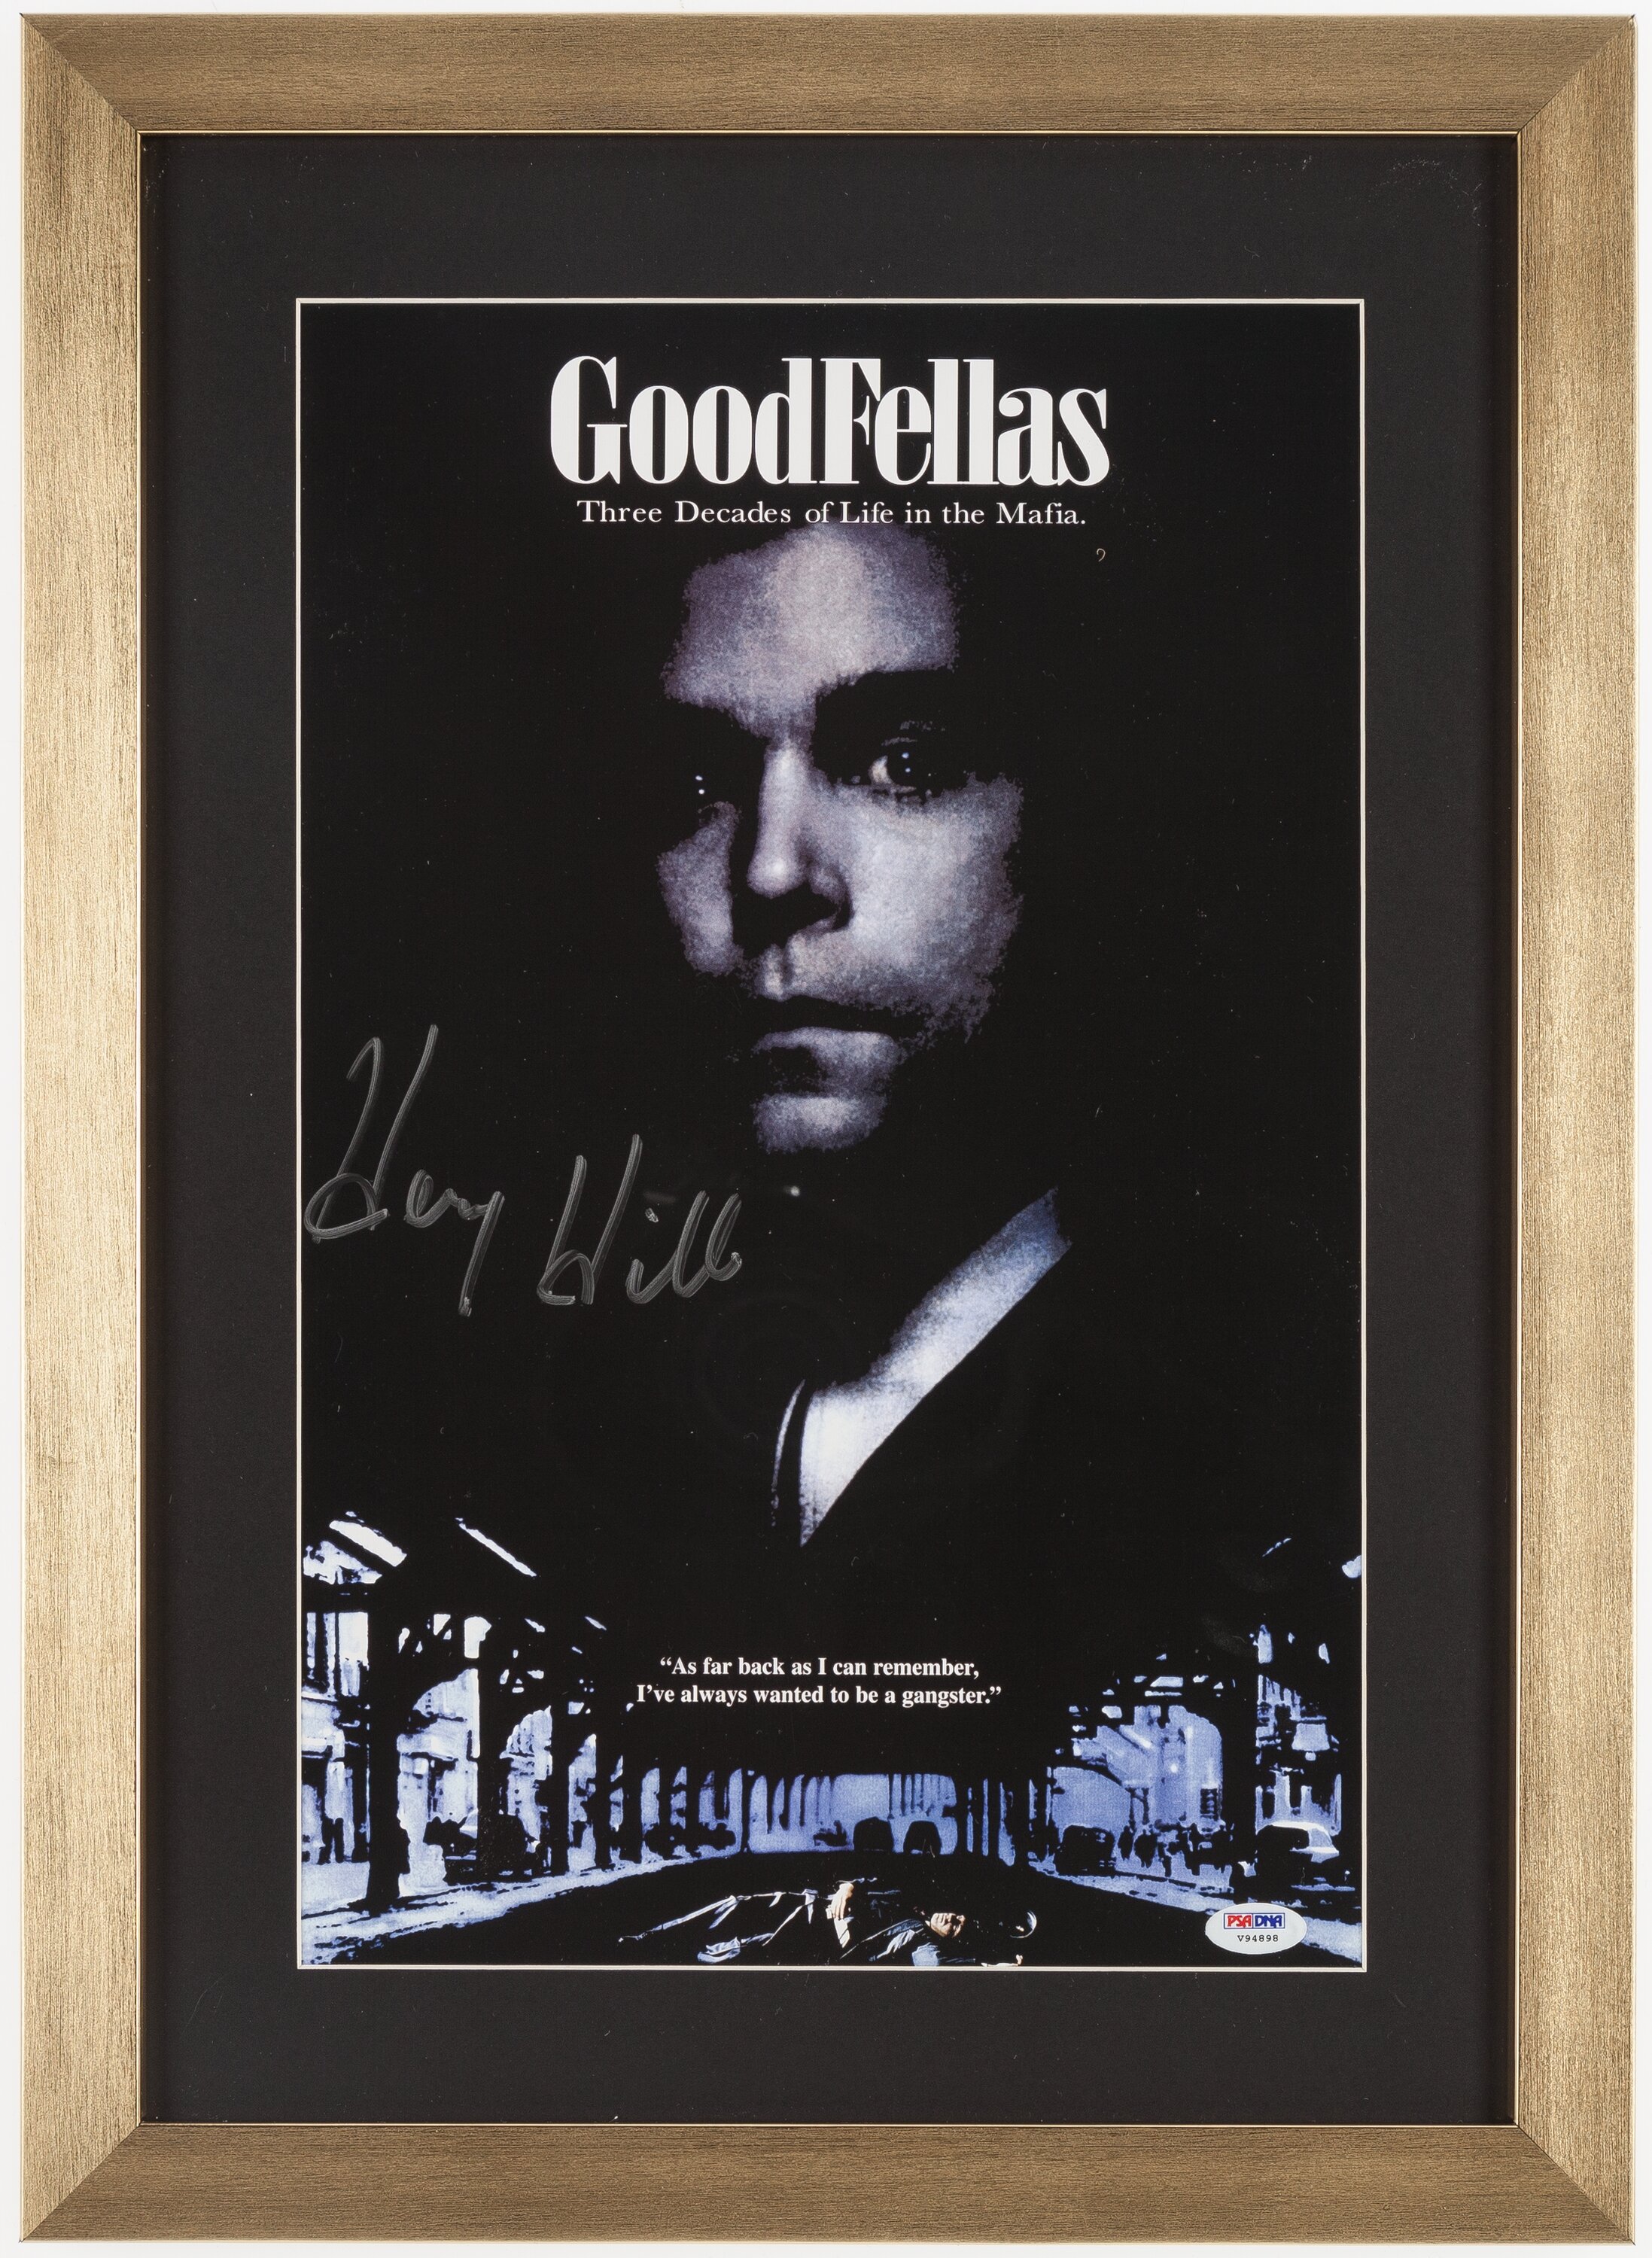 Henry Hill Signed Goodfellas Print Miscellaneous Lot 44155